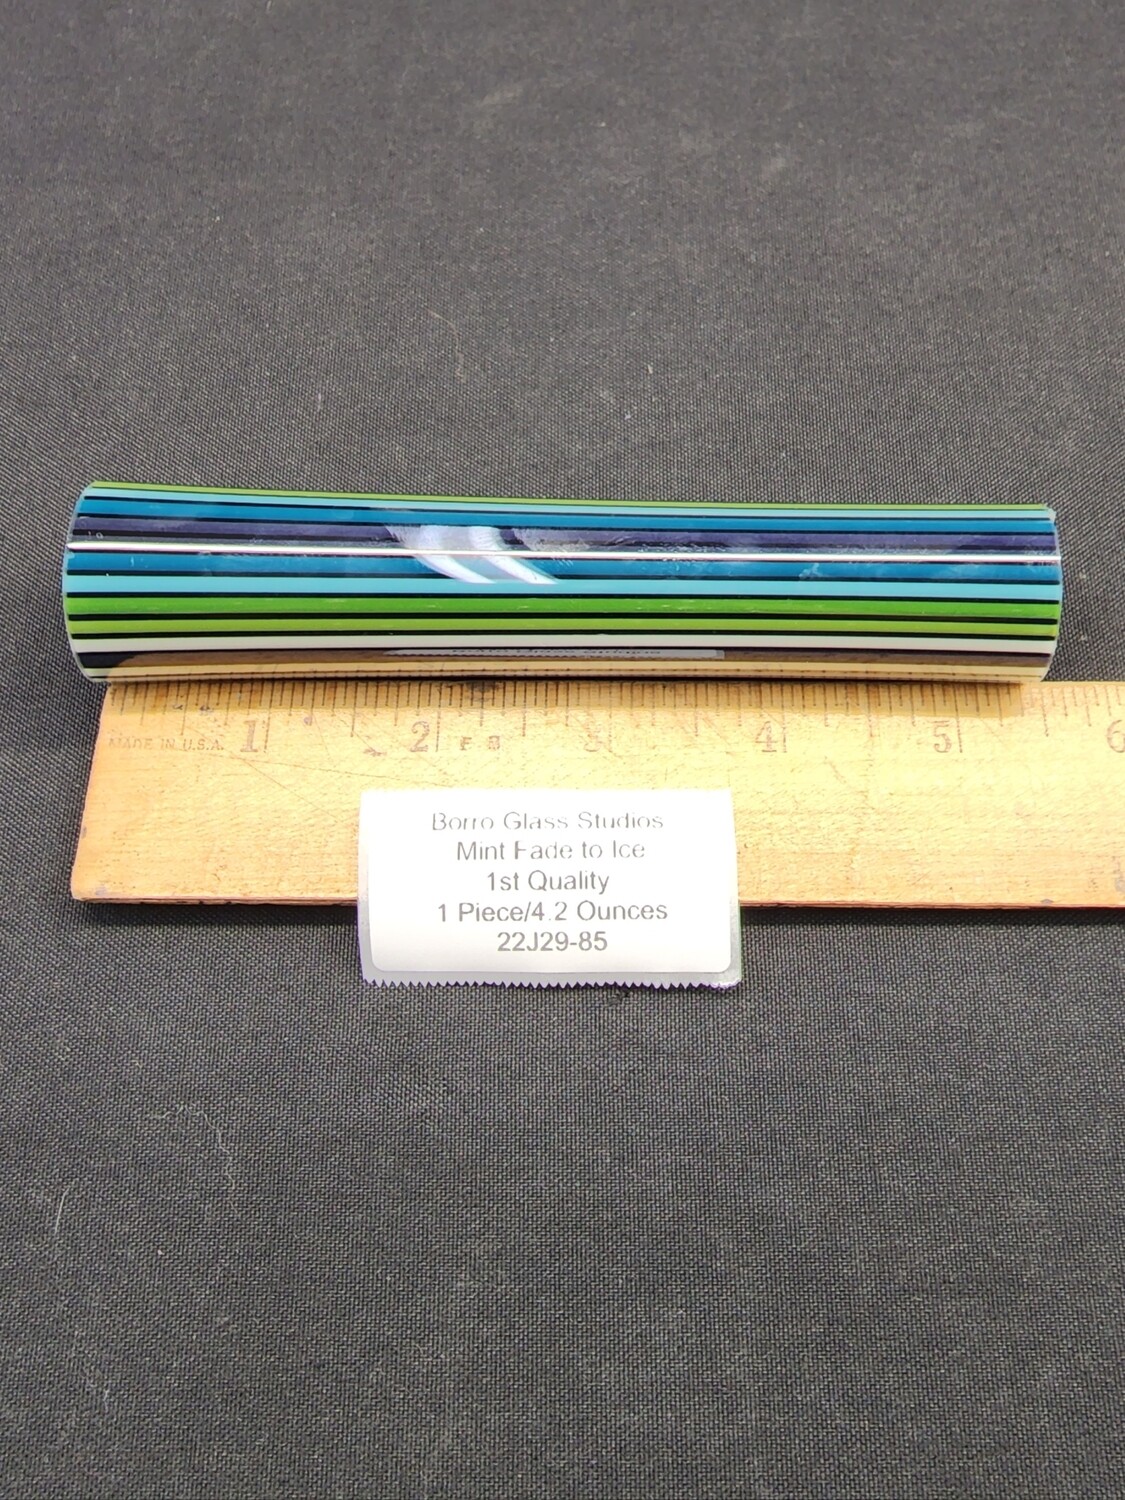 Mint Fade to Ice Boro Vac Stacked Line Tubing - 1st Quality - 4.2 Ounces